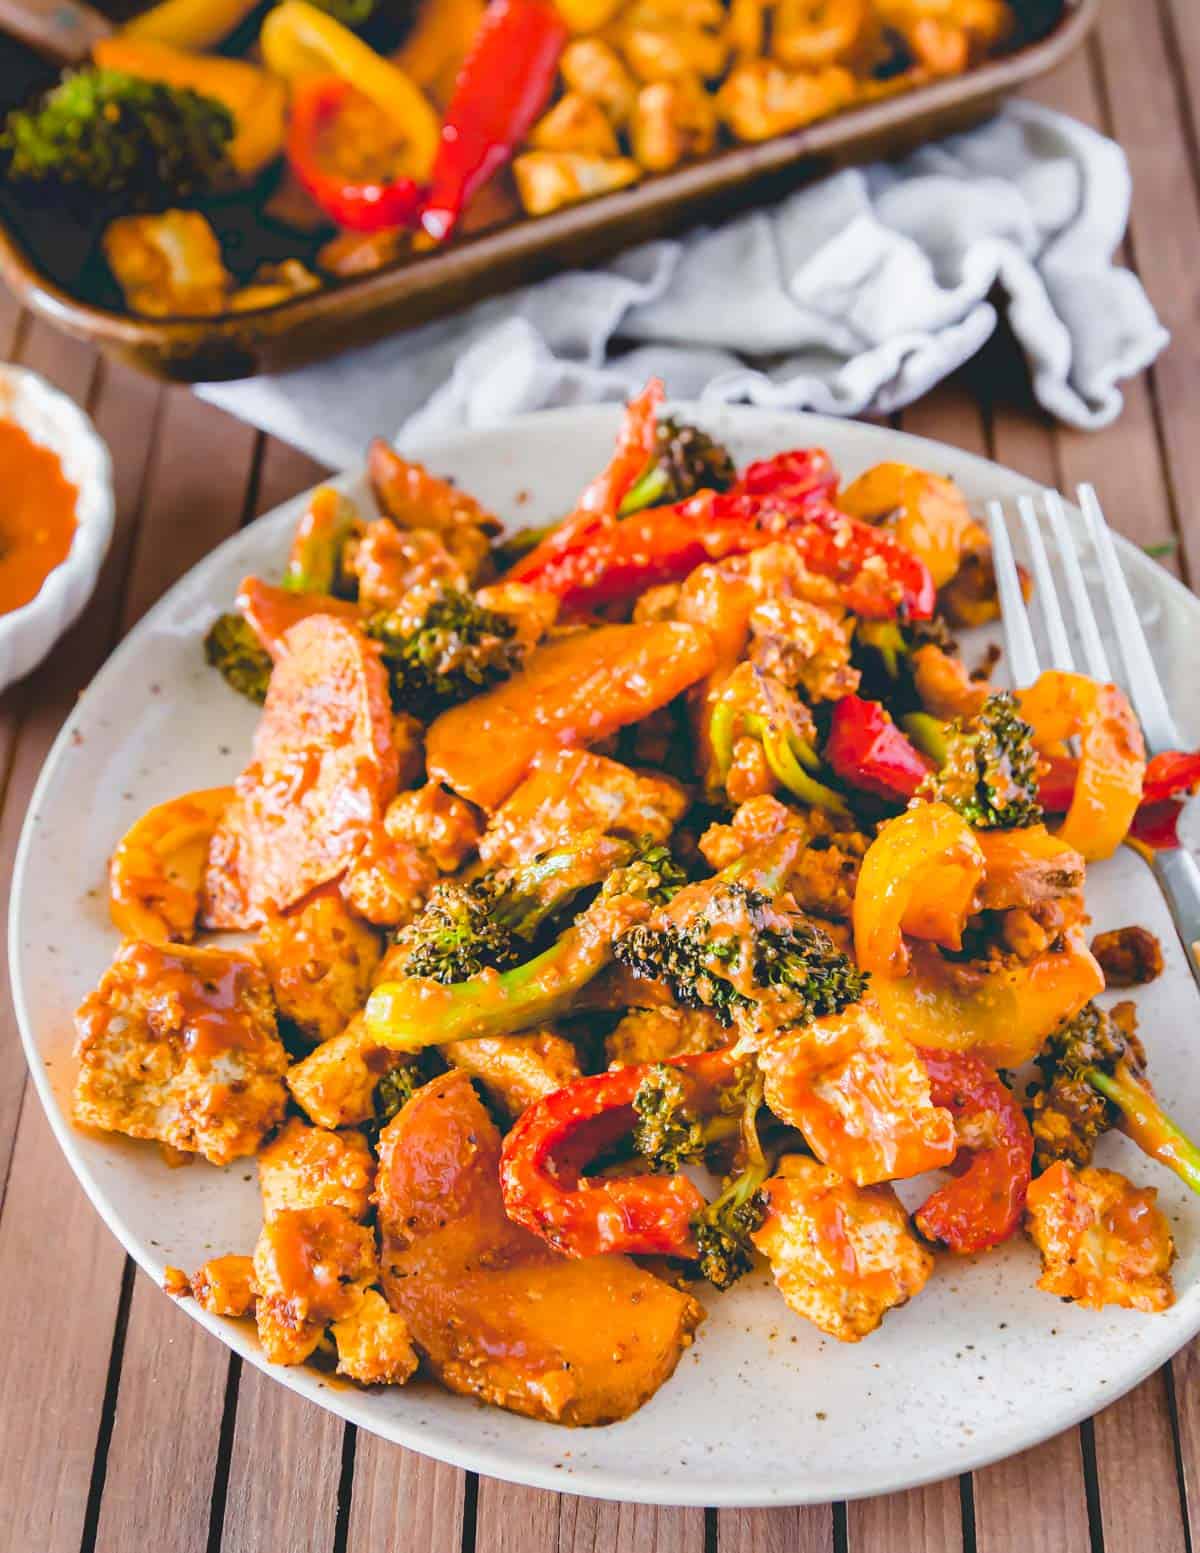 Sheet pan dinner of BBQ tofu, broccoli, peppers and sweet potatoes served on a plate.